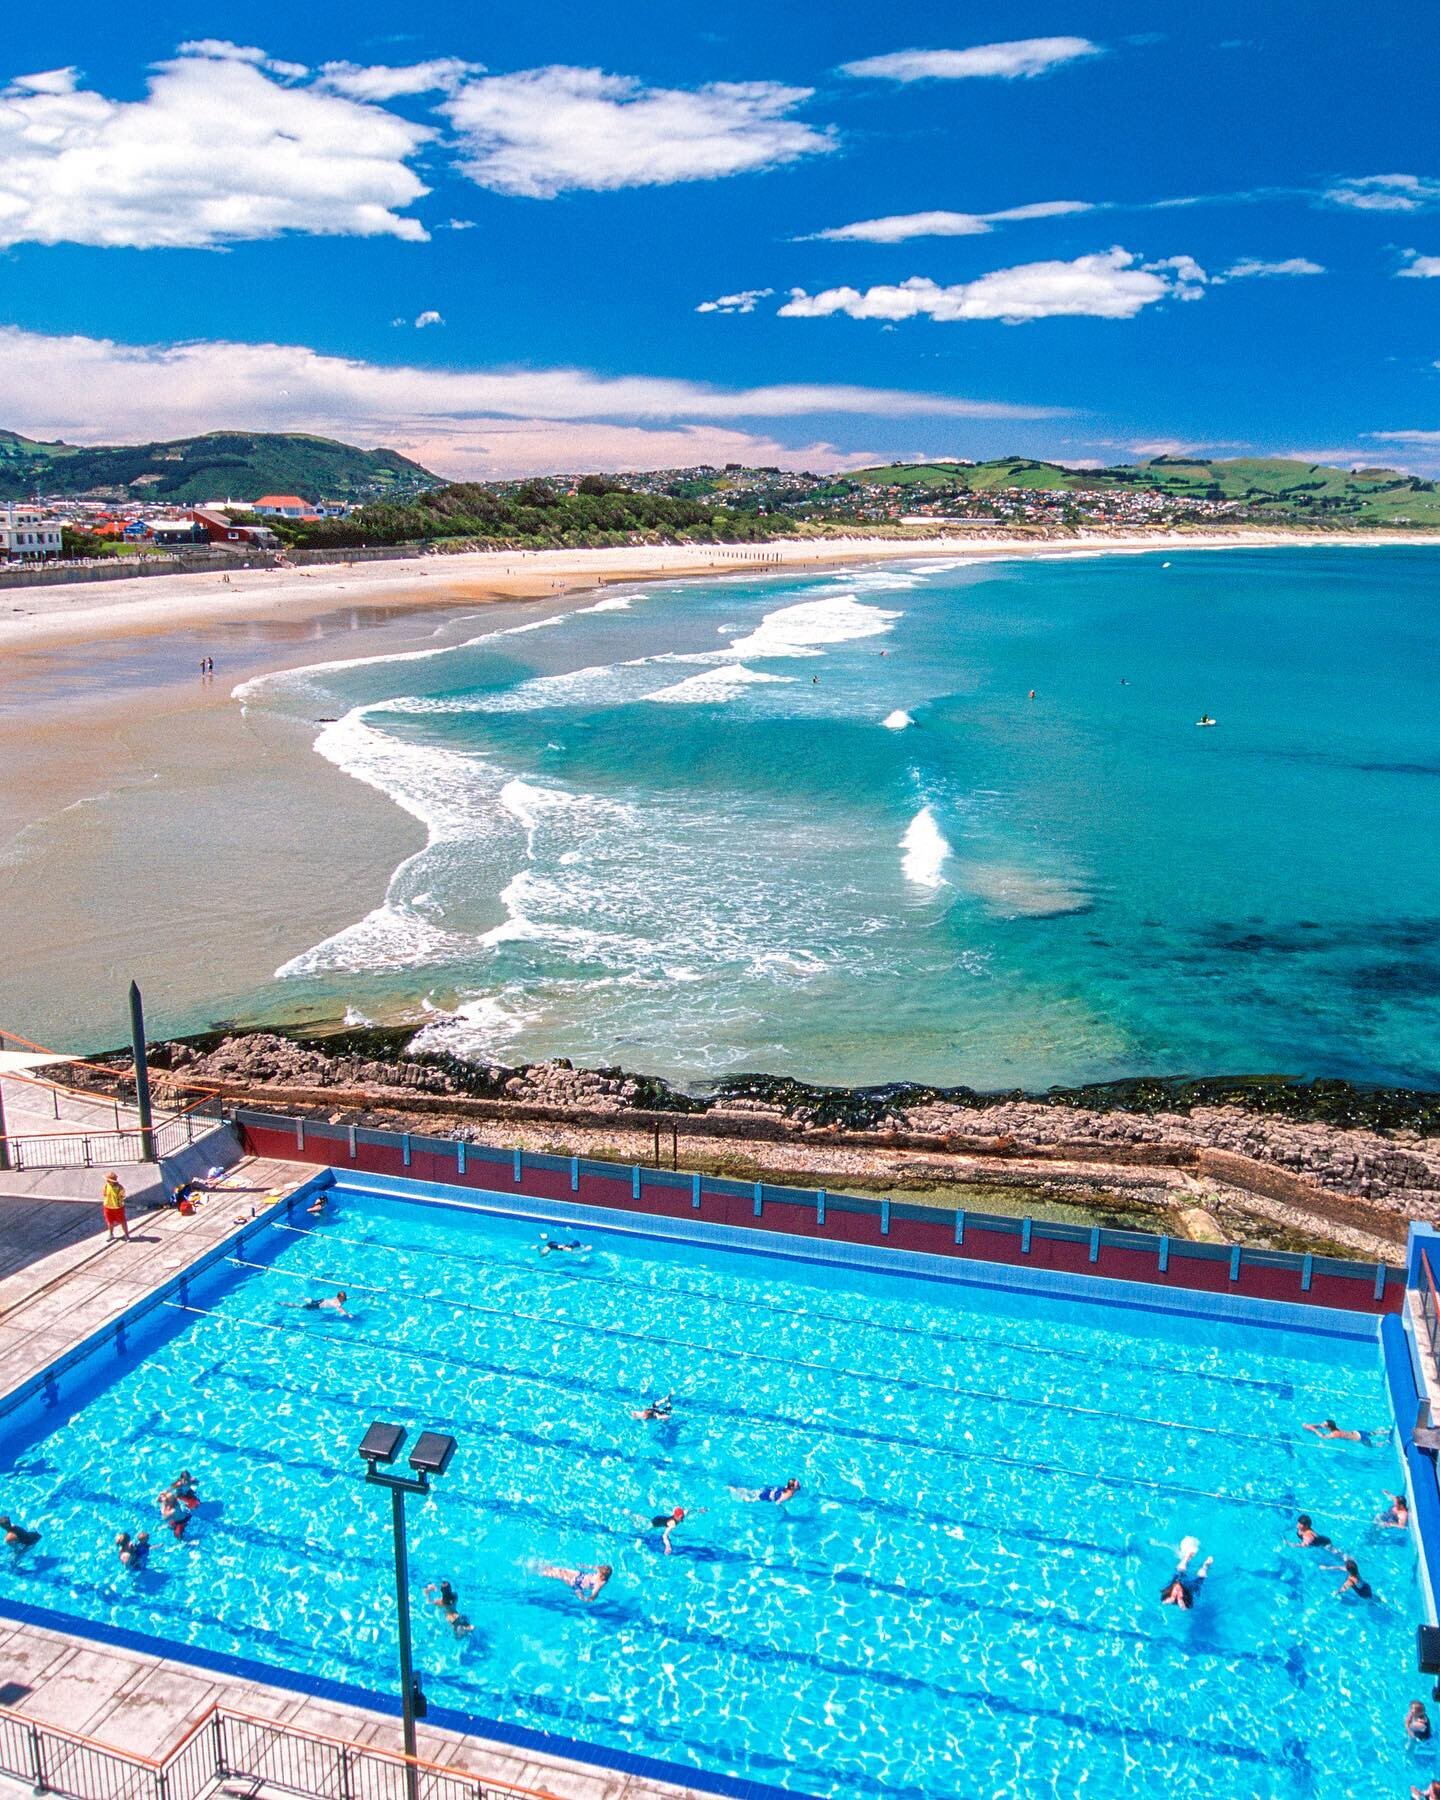 St Clair Pool is an outdoor saltwater pool built on a lovely site at the southern end of St Clair beach in Dunedin, New Zealand 😍 🇳🇿 Its stunning views on the wild Pacific Ocean and location next to the beach with white sand makes it a perfect spo